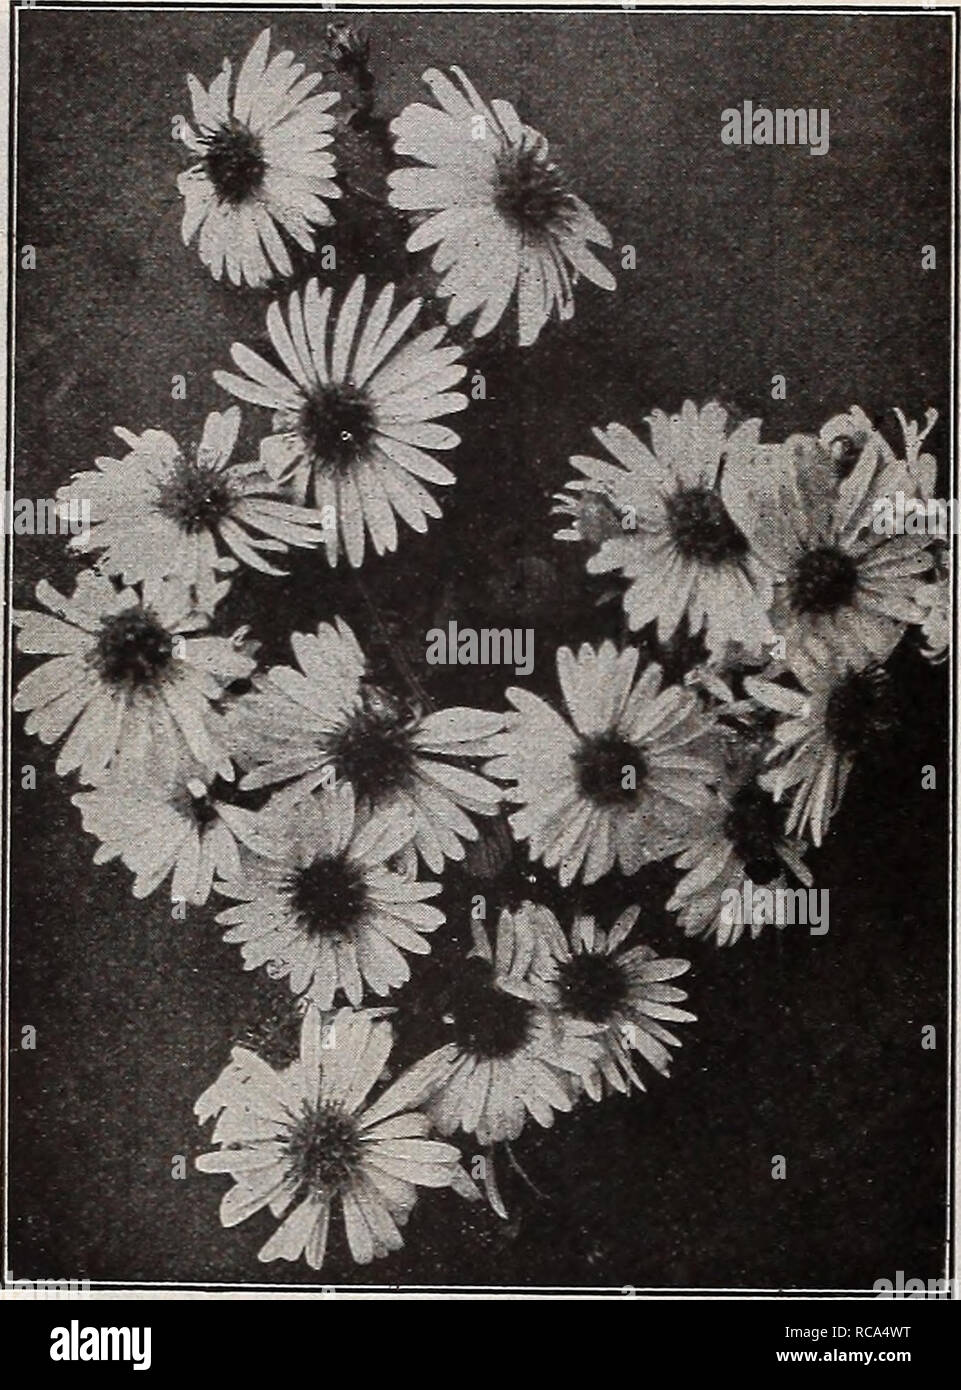 . Dreer's garden book 1918. Seeds Catalogs; Nursery stock Catalogs; Gardening Equipment and supplies Catalogs; Flowers Seeds Catalogs; Vegetables Seeds Catalogs; Fruit Seeds Catalogs. 182          qggjj   -J-U-U. New Hardy Aster Novi-BELgn Climax Dwarf Alpine Hardy Asters Summer-flowering Hardy Asters Are offered on page 181 PLANS OF HARDY BORDERS These are shown together with list of suitable plants in our Special Catalogue of Hardy Plants. Copies free on request. a#     K-- &quot; 'â¢'&quot;â tfr - ^M H-  BP^^^d -     i 0 I*-**- #% ^*Â» Hardy Asters, or Michaelmas Daisies FALL-FLOWERING HARD Stock Photo